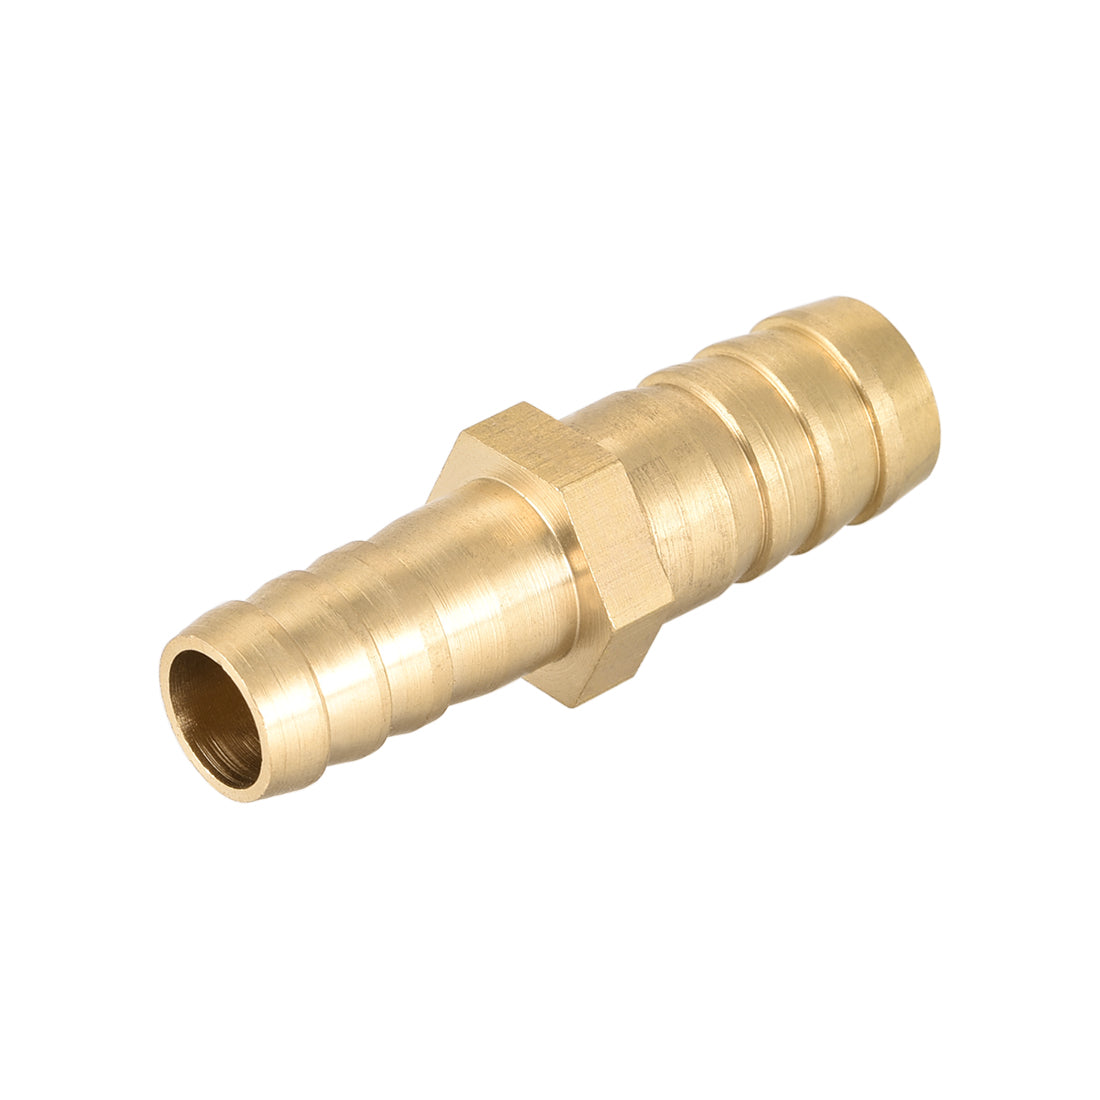 Uxcell Uxcell Straight Brass Barb Fitting Reducer, Fit Hose ID 21mm to 15mm